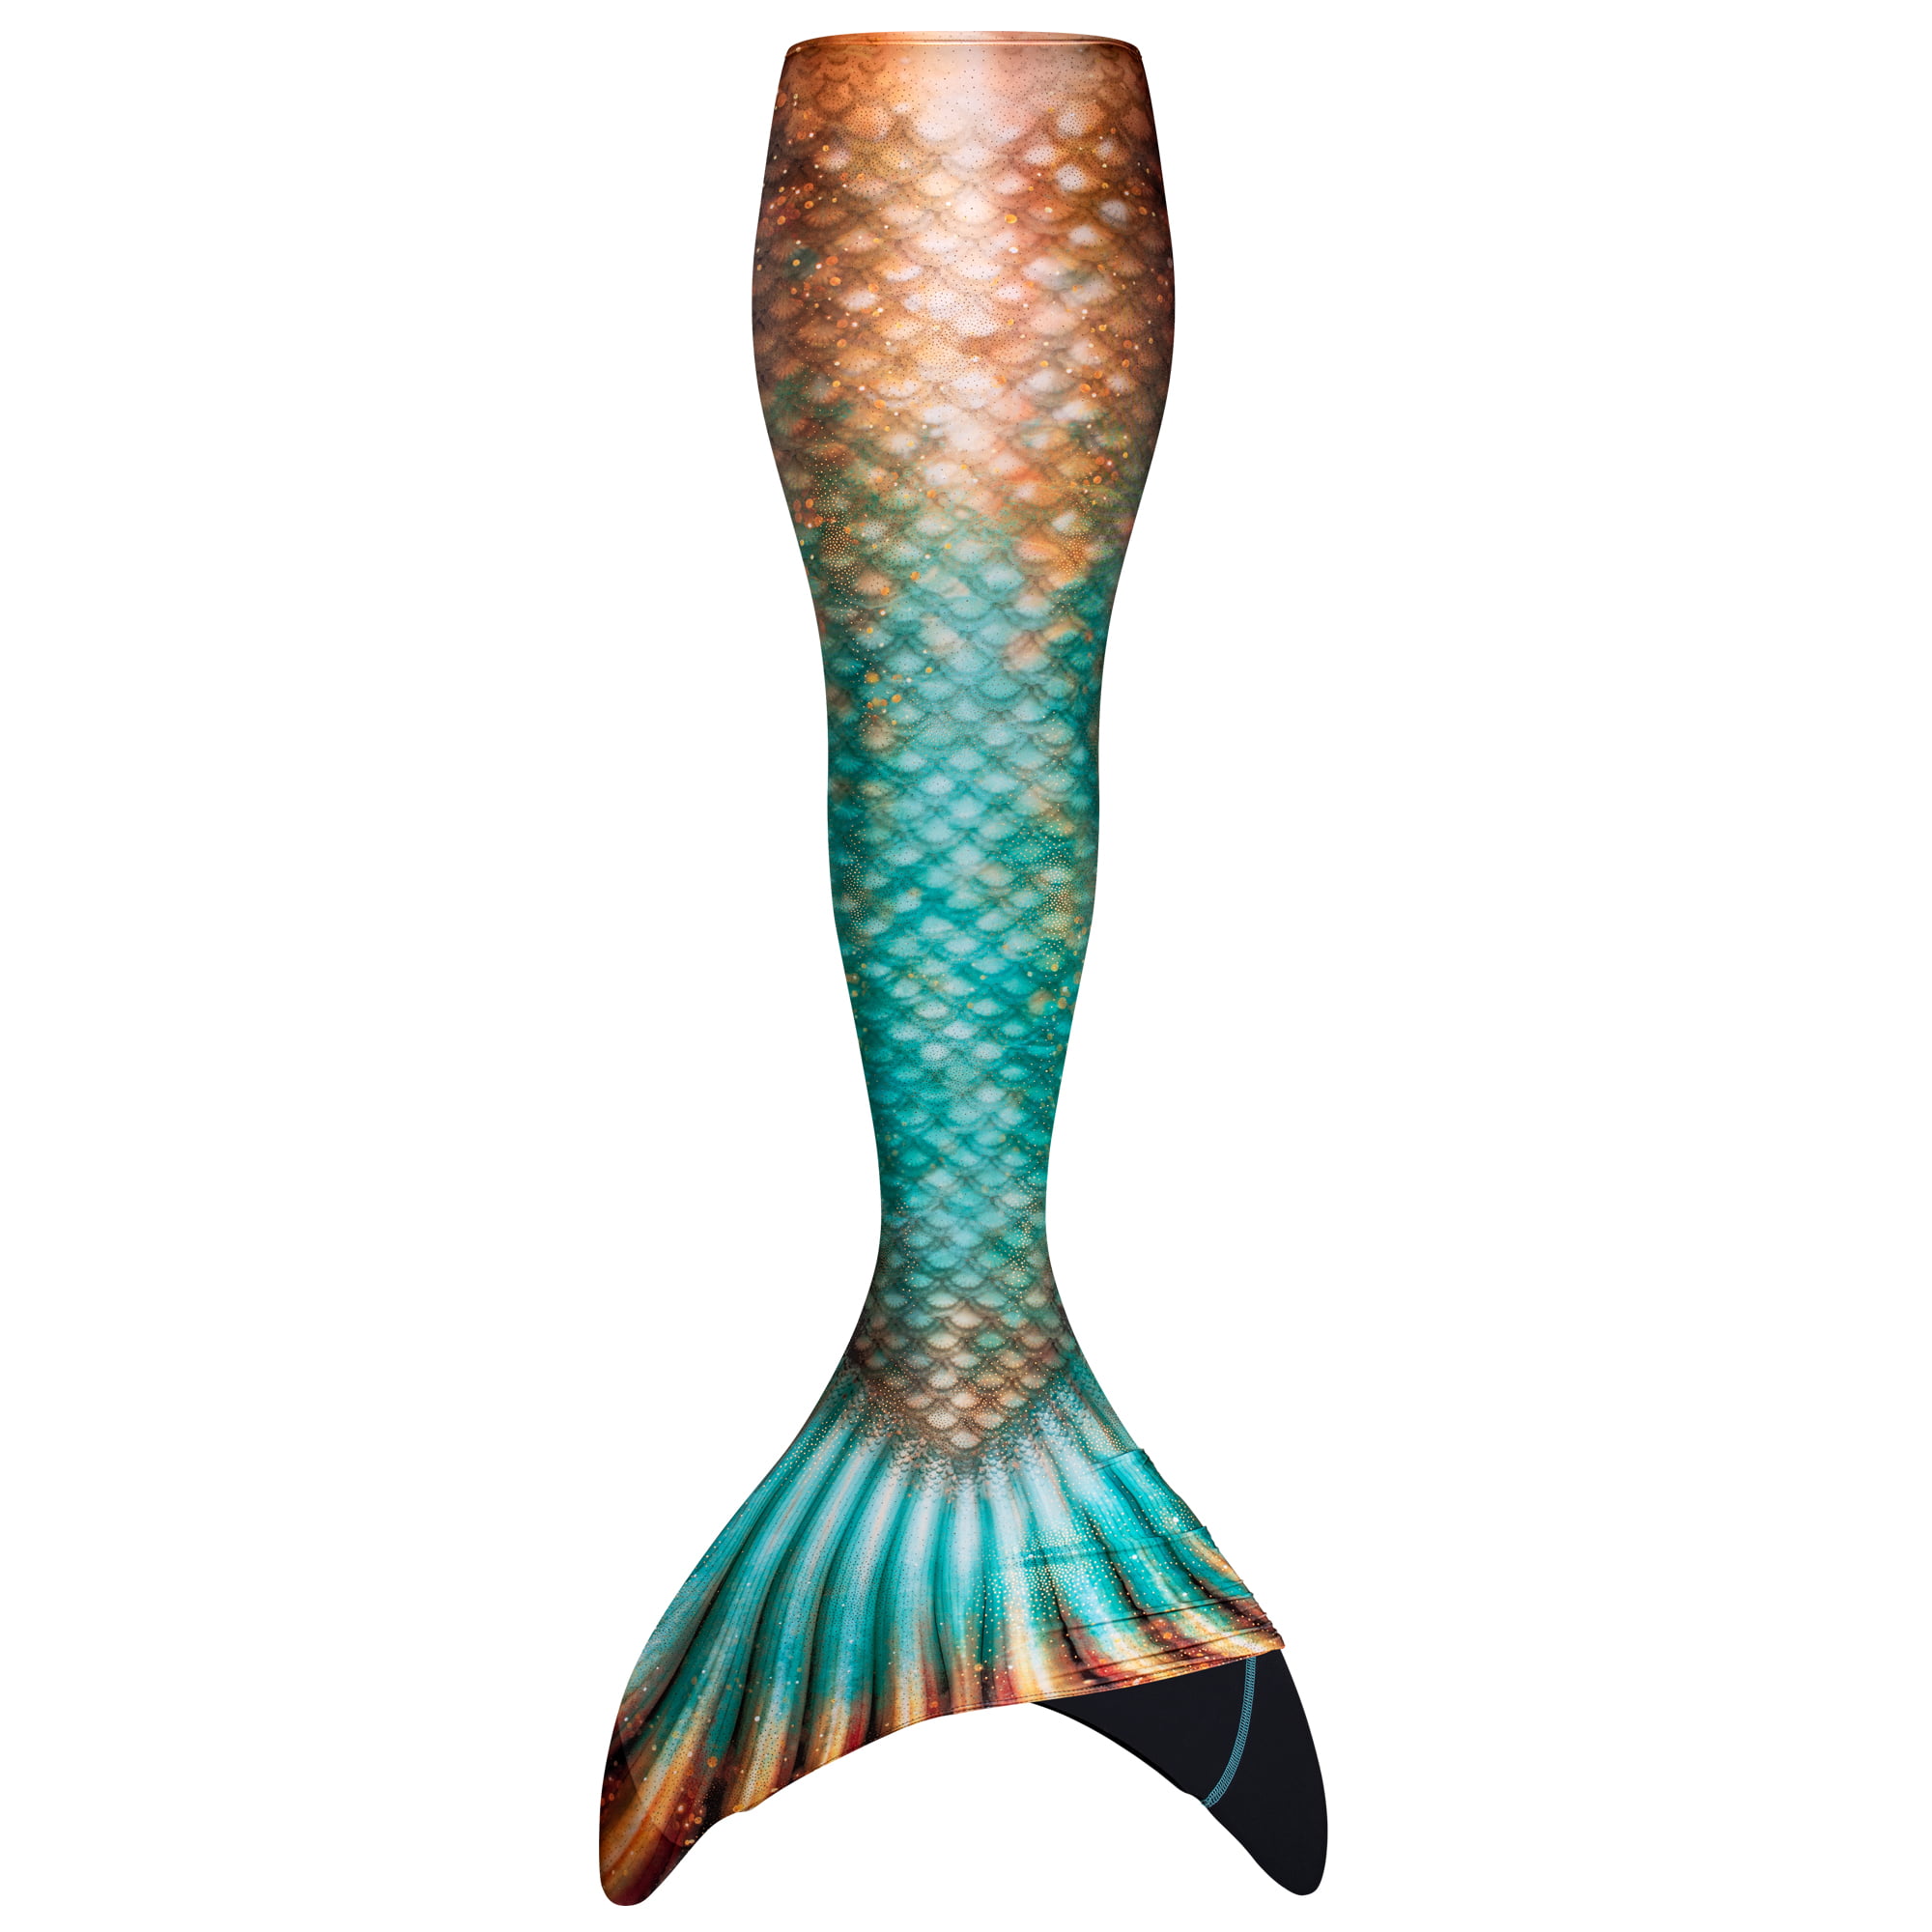 Fin Fun Limited Edition Wear-Resistant Mermaid Tail for Swimming Kids Kid Sizes Monofin Included 